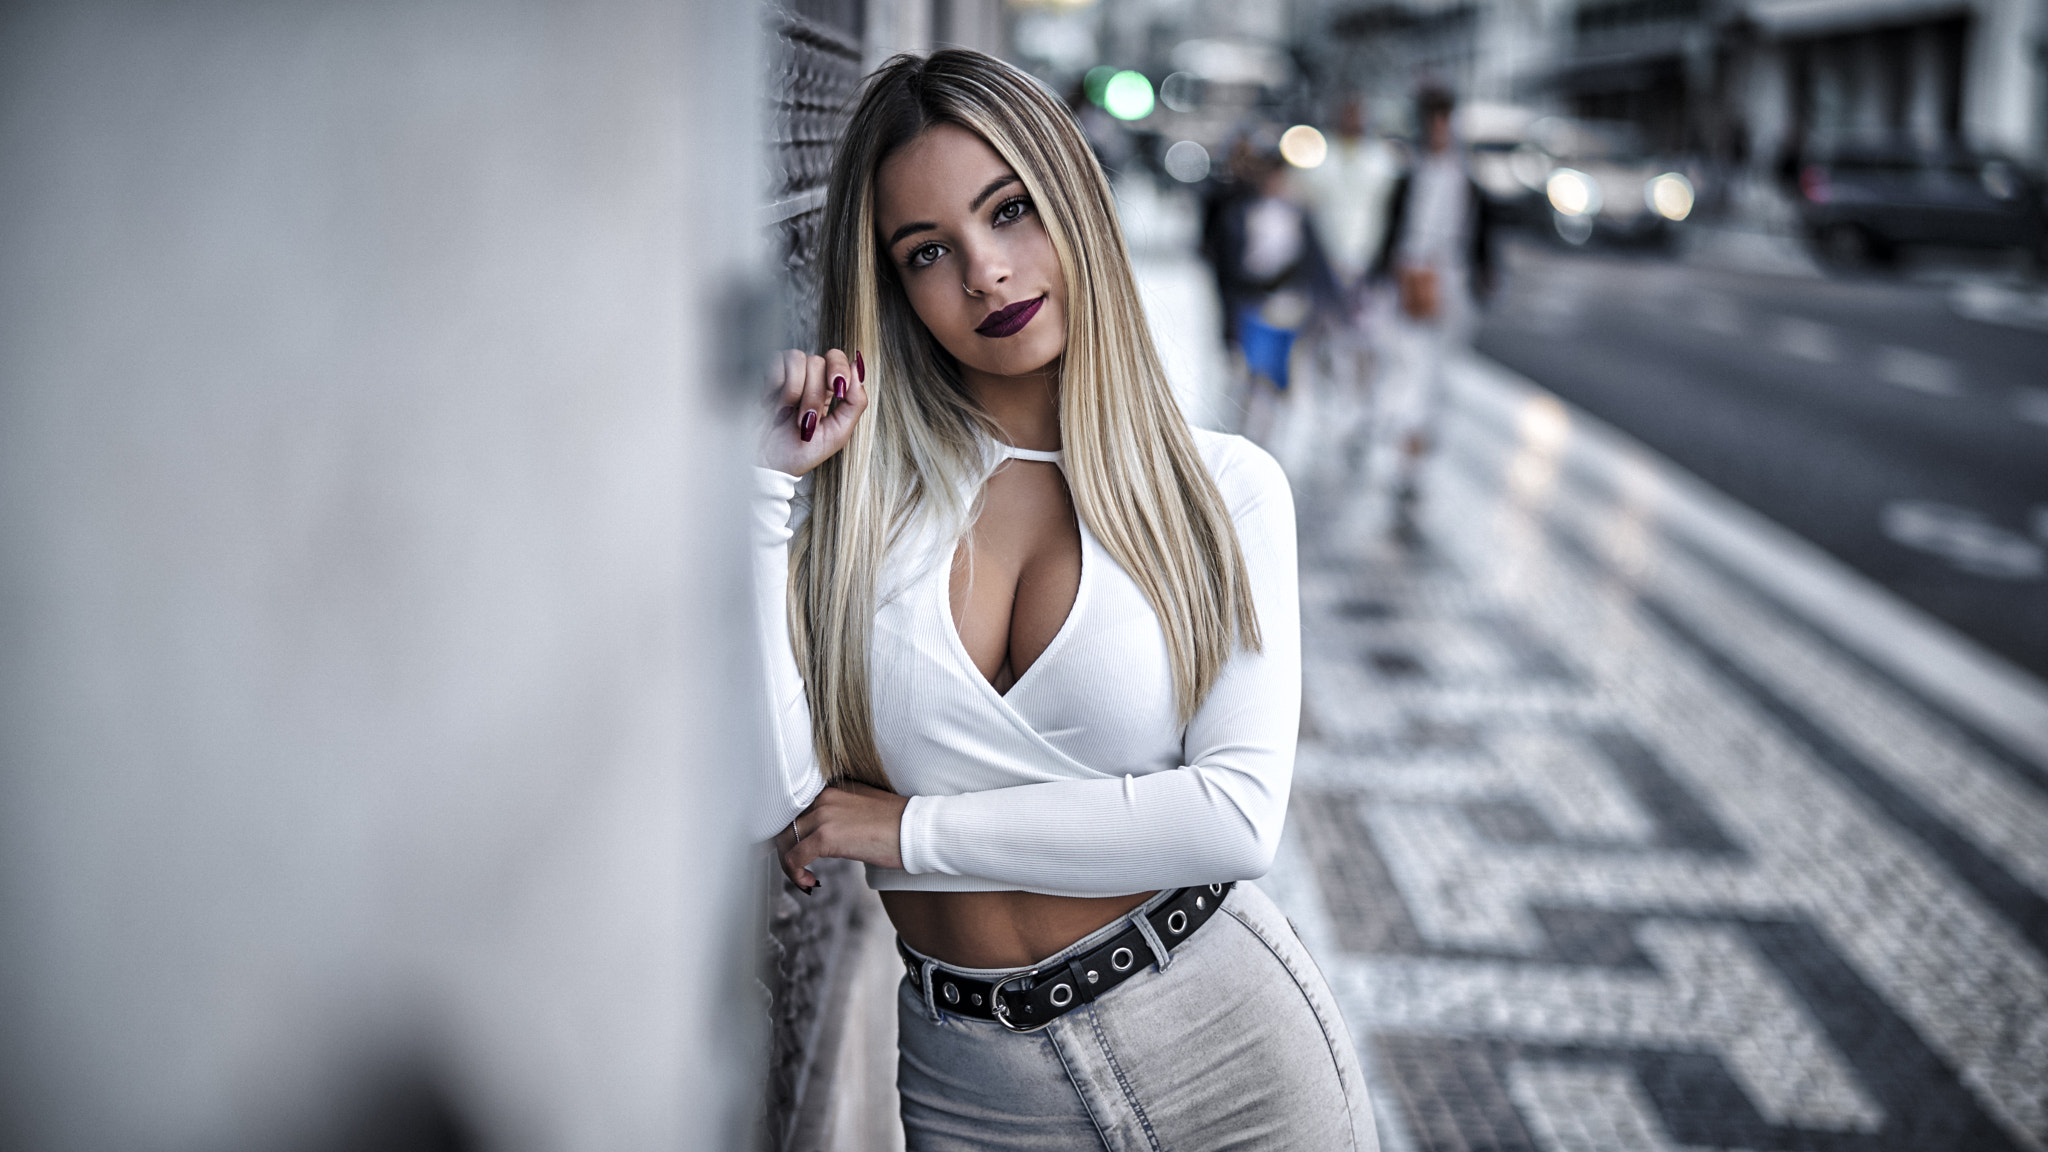 People 2048x1152 Pedro Courelas women blonde long hair straight hair makeup looking at viewer piercing pierced nose lipstick painted nails red nails smiling blouses white clothing cleavage belly belt jeans outdoors city sidewalks Alexandra Carocha